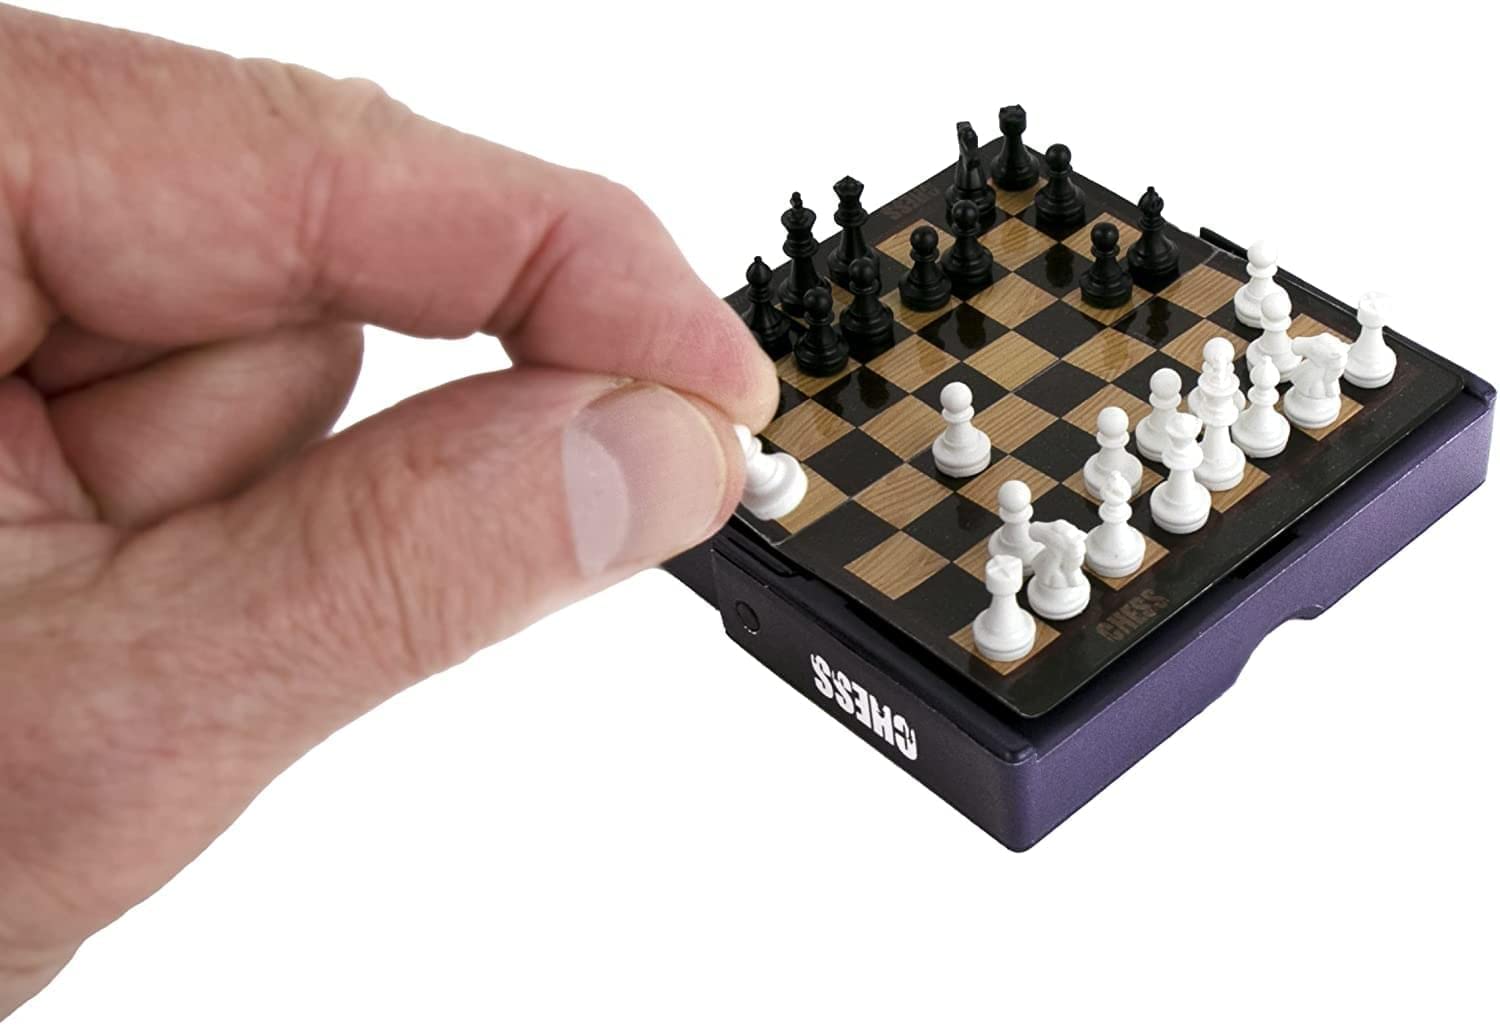 Toy World's Smallest Toy -  Chess-hotRAGS.com